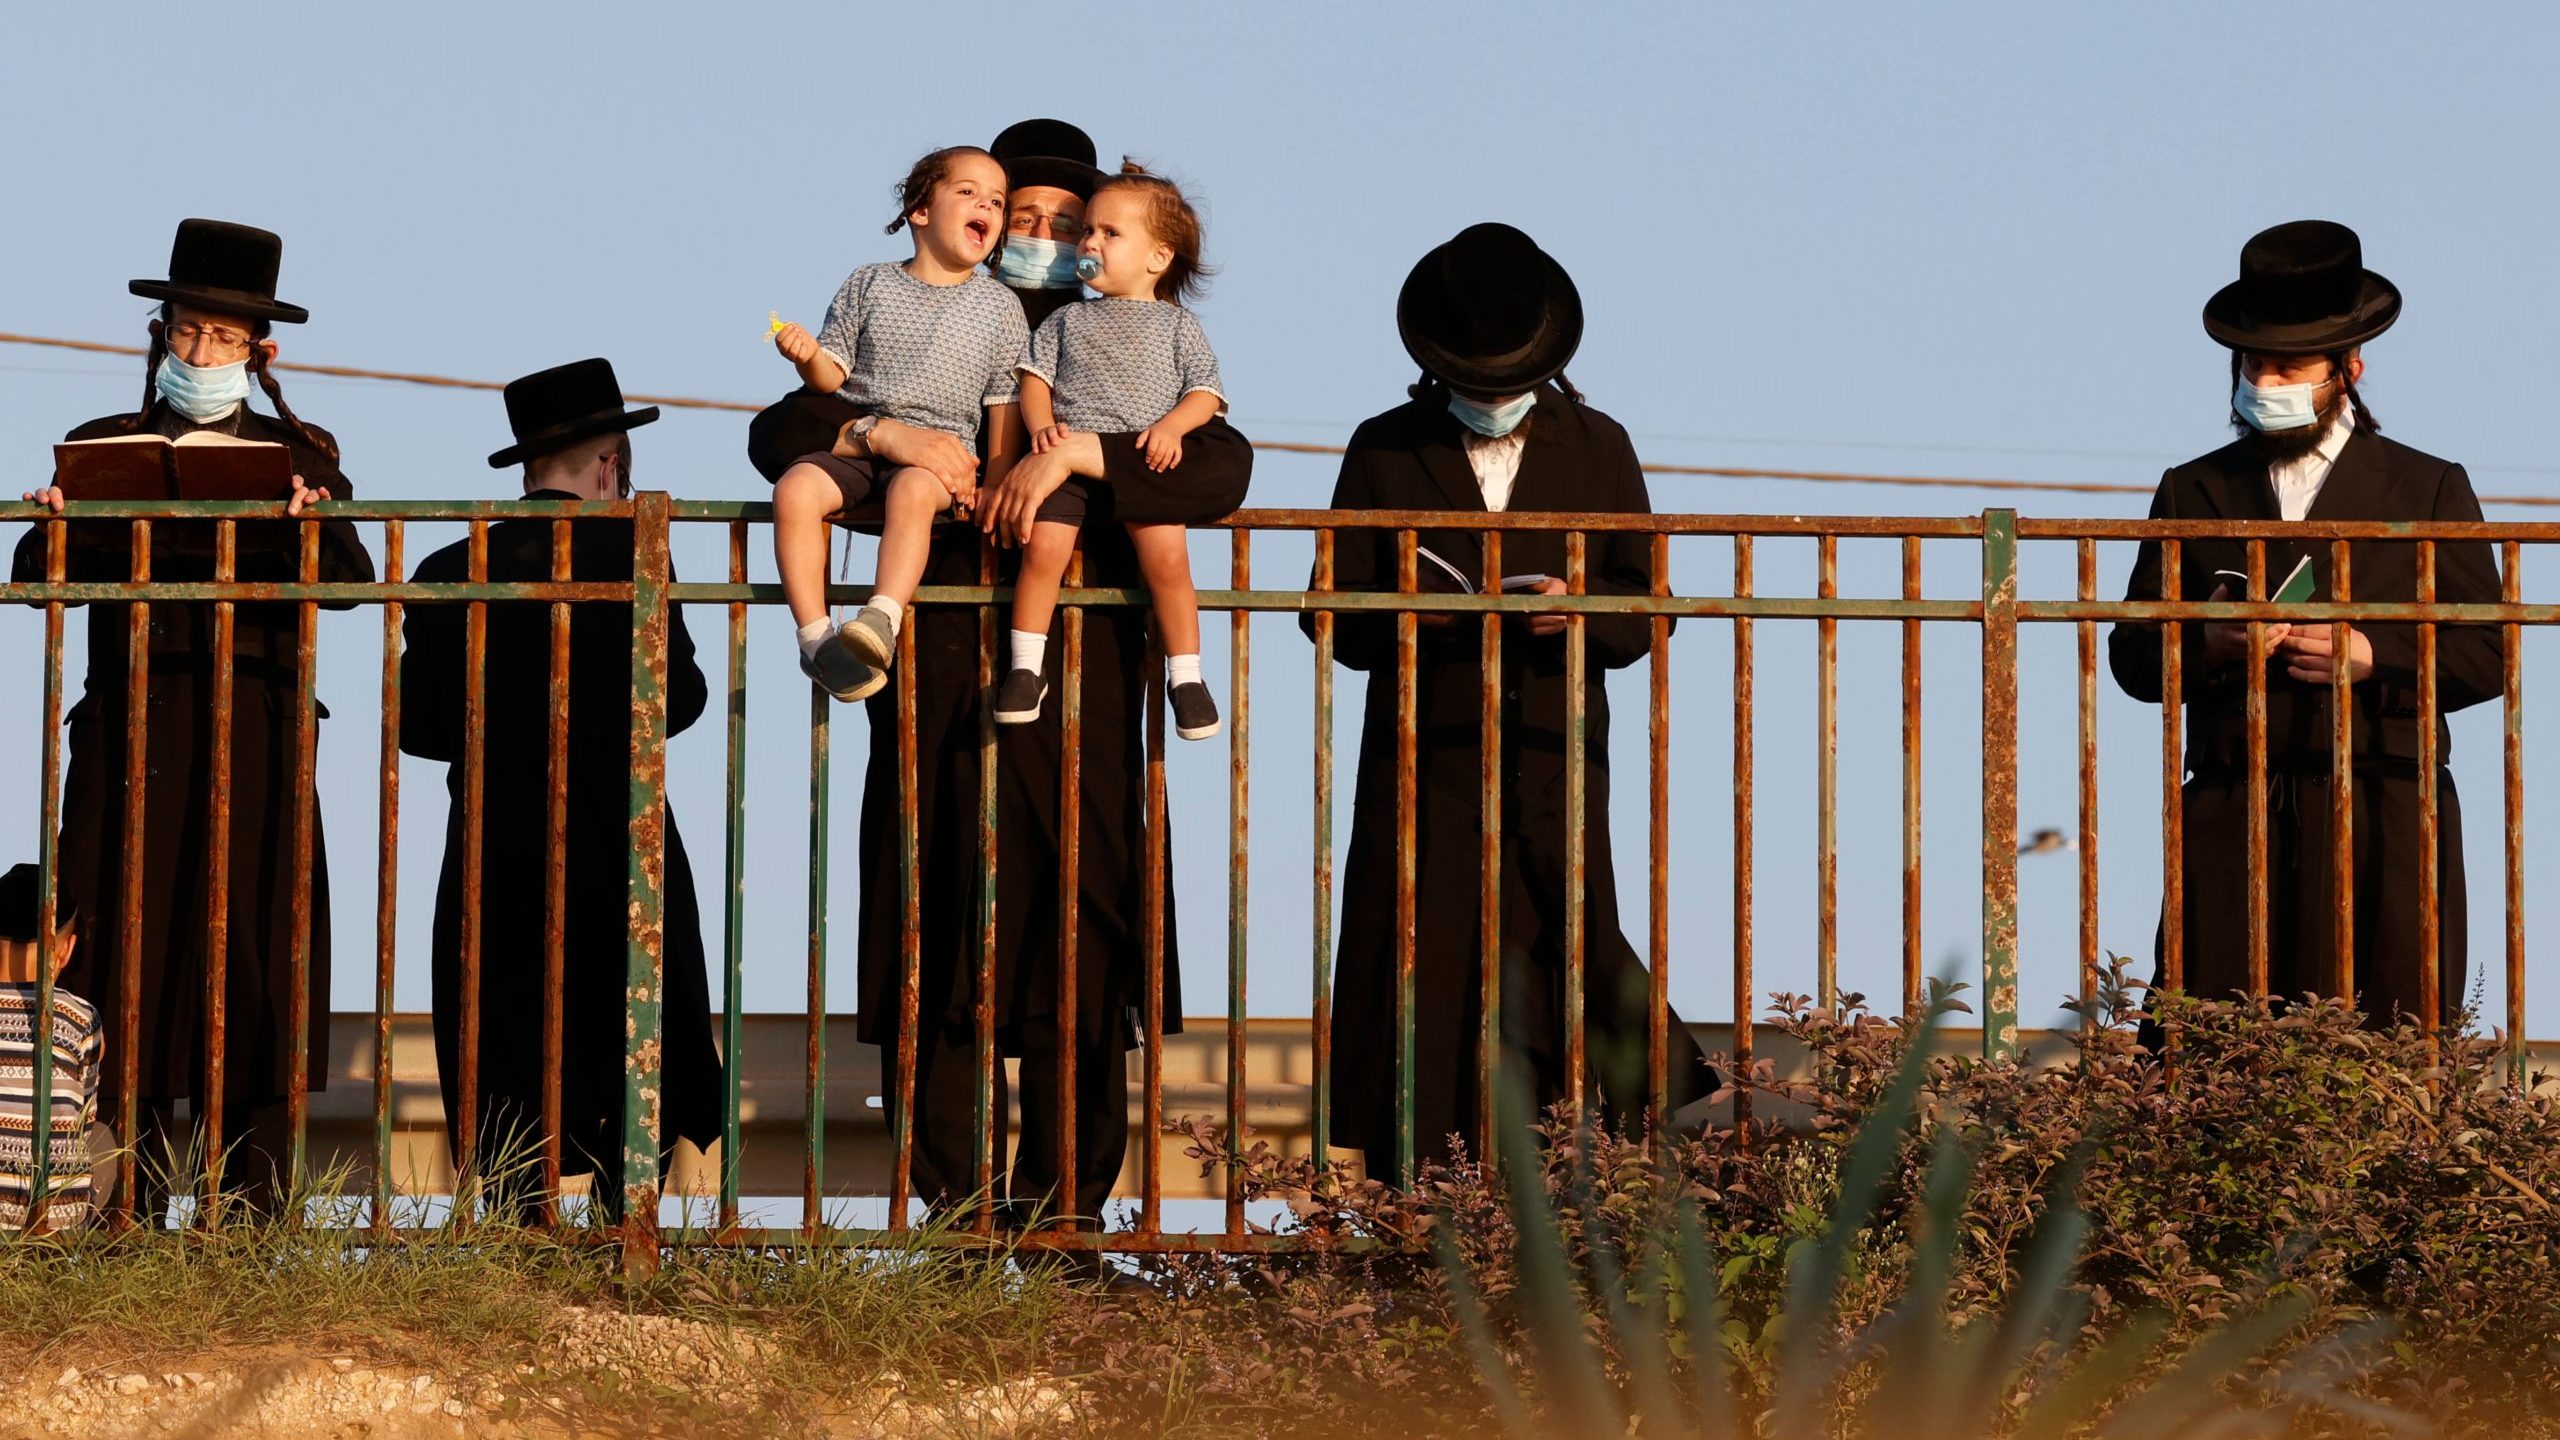 Amid Lockdown, Israel’s Ultra-Orthodox Rely on Each Other